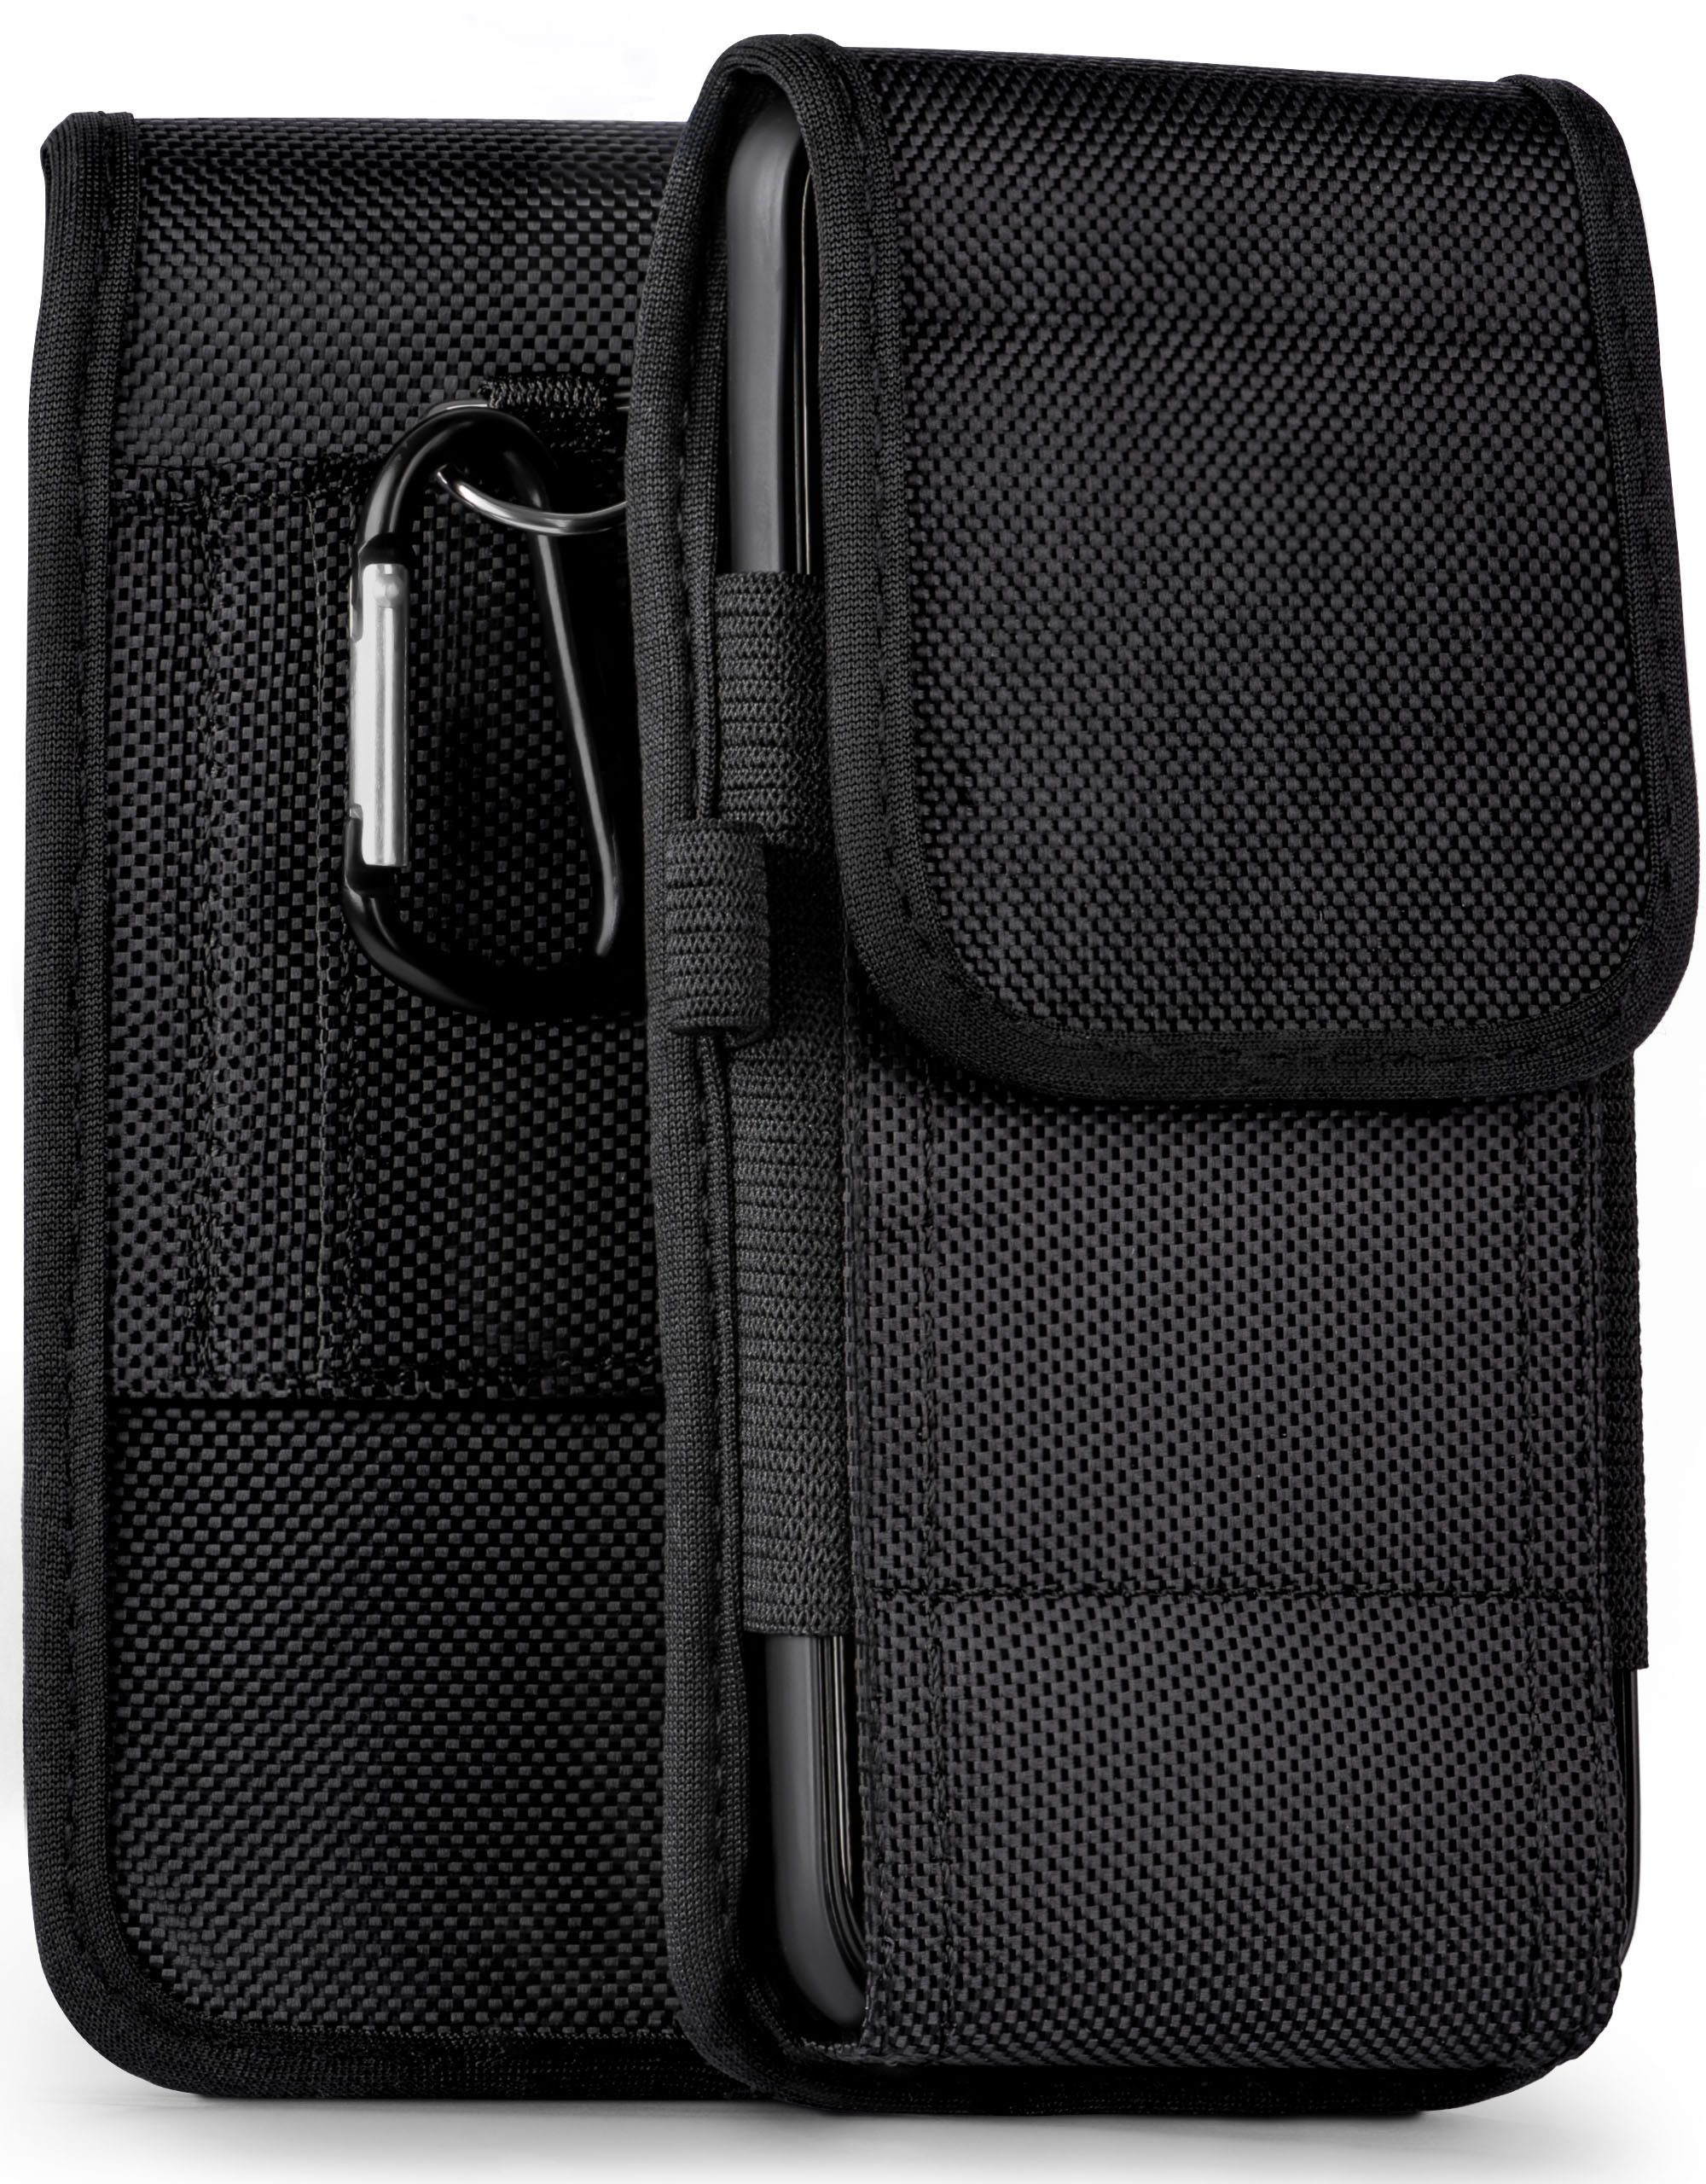 Agility Case, Wiko, MOEX 5, Holster, Trail Lenny